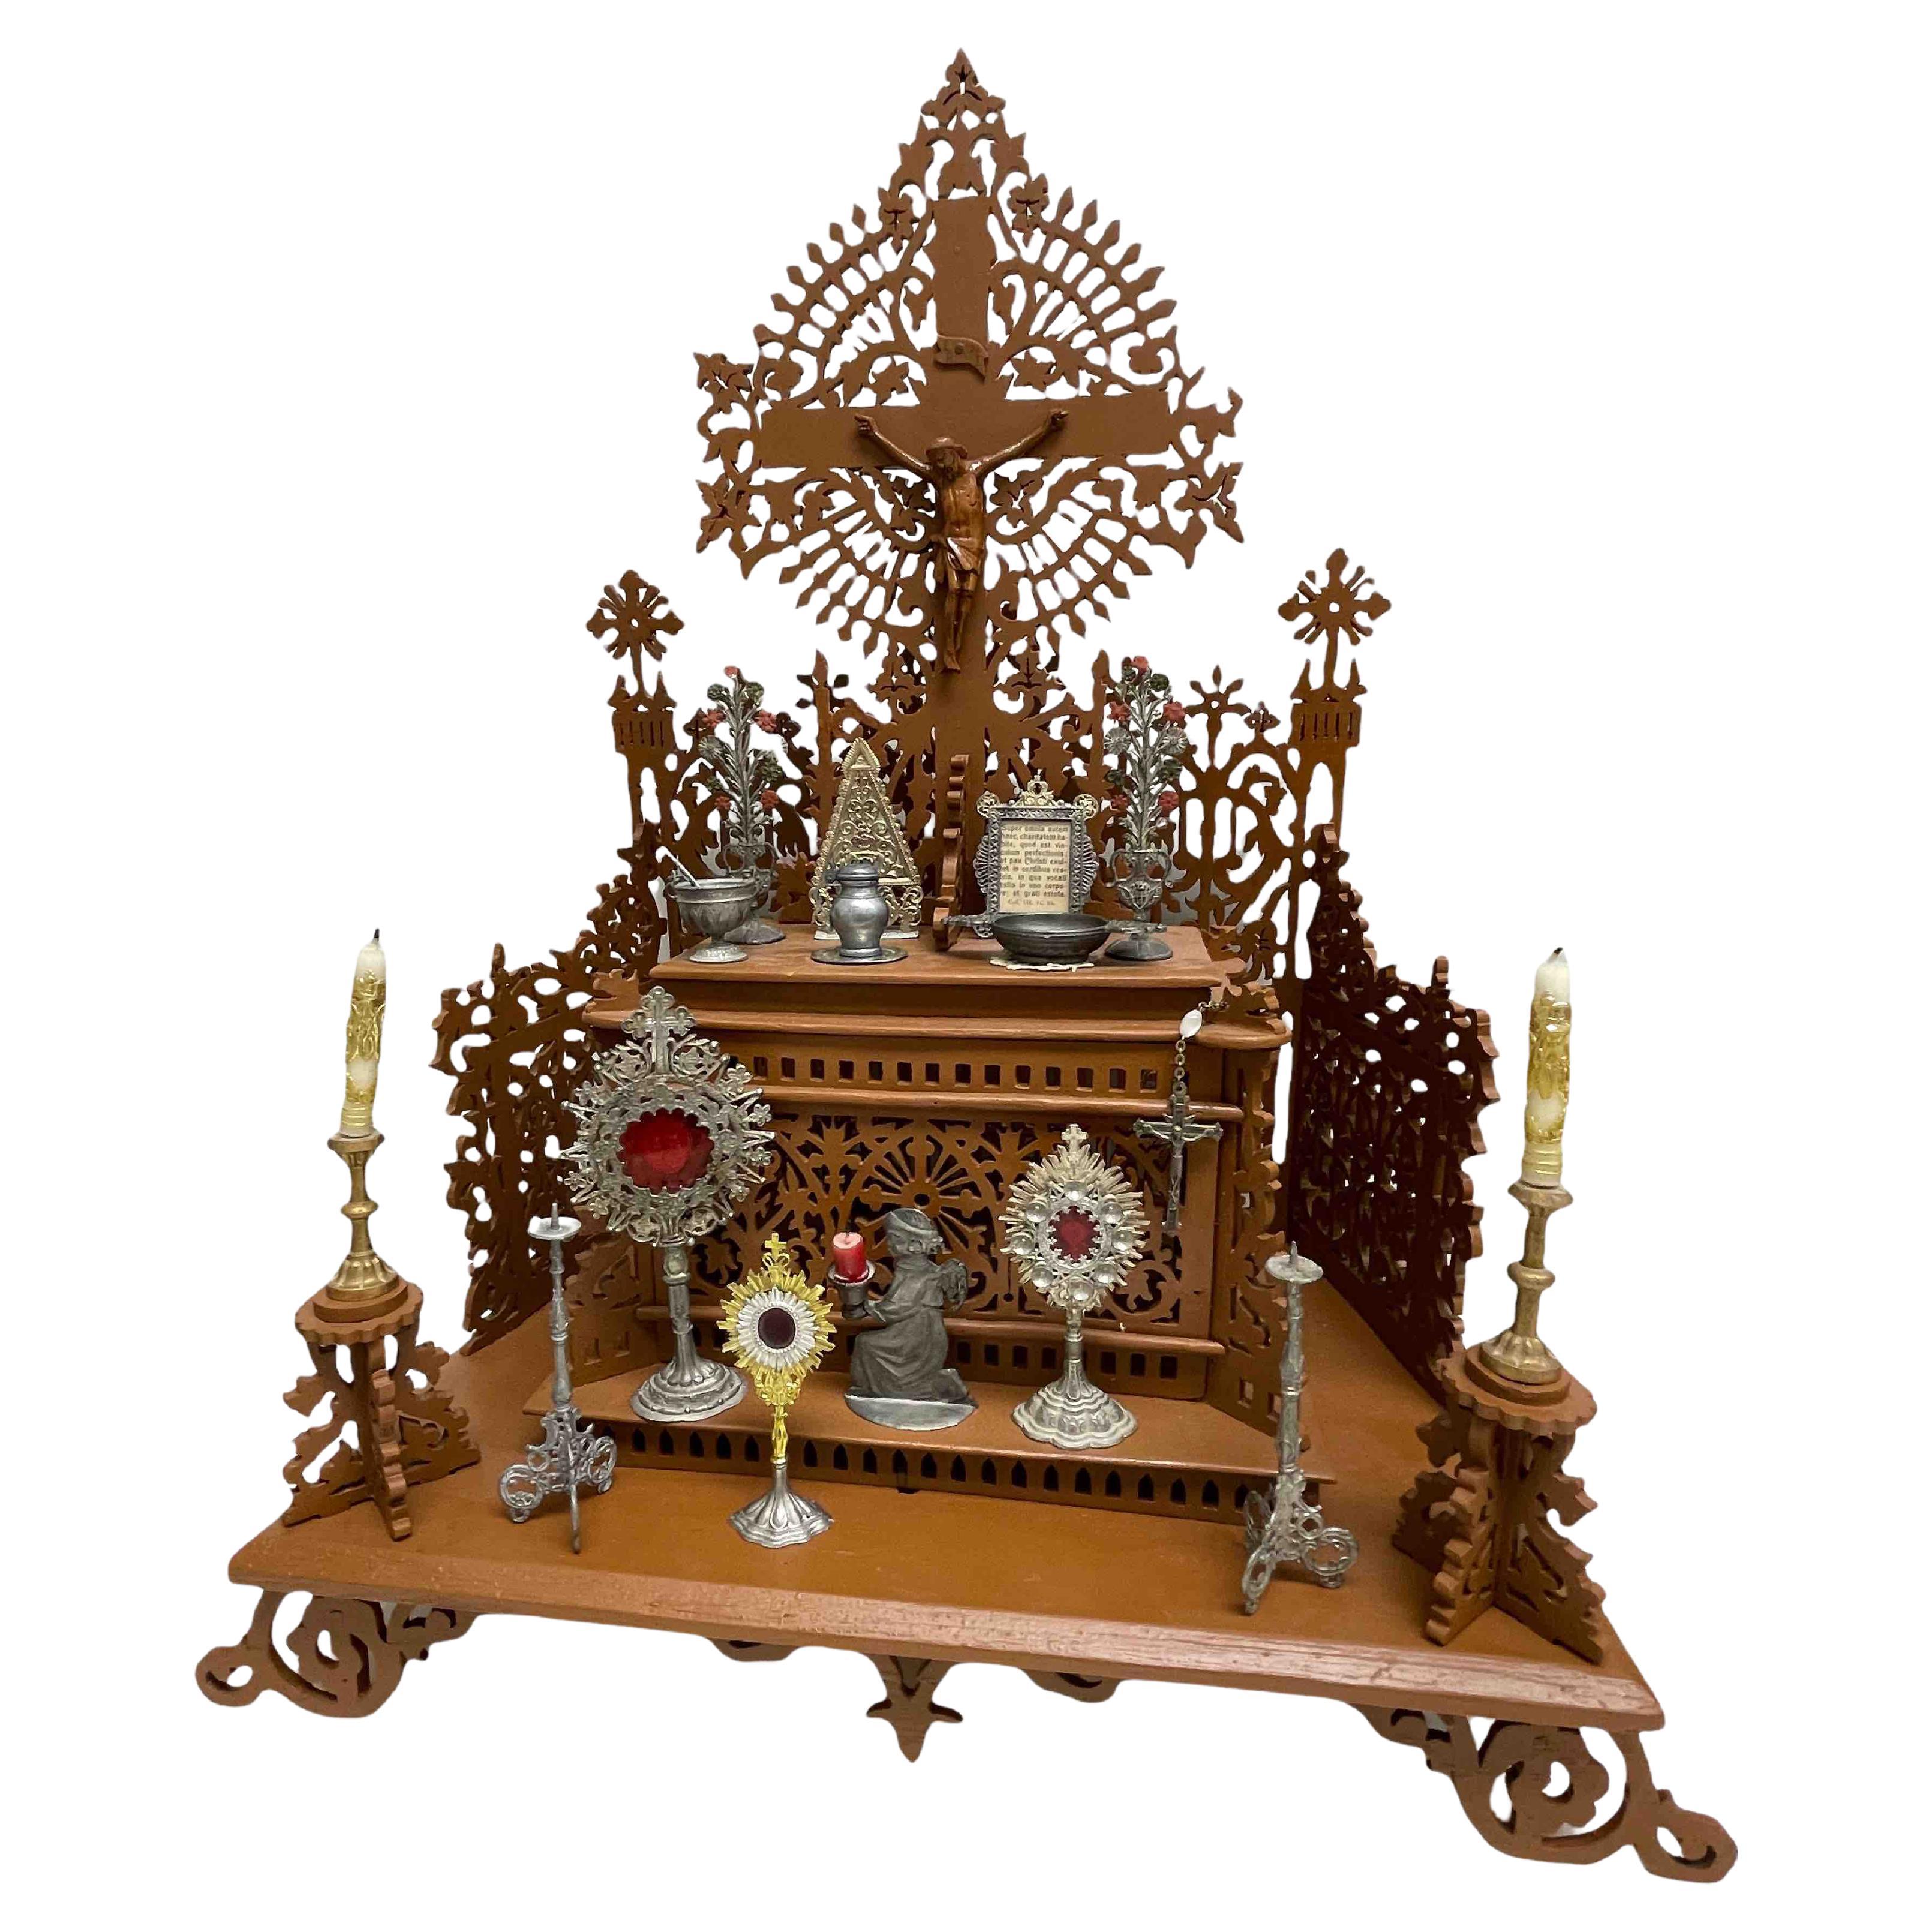 Wood Fretwork House Altar with Accessories Black Forest Folk Art 1900s For Sale